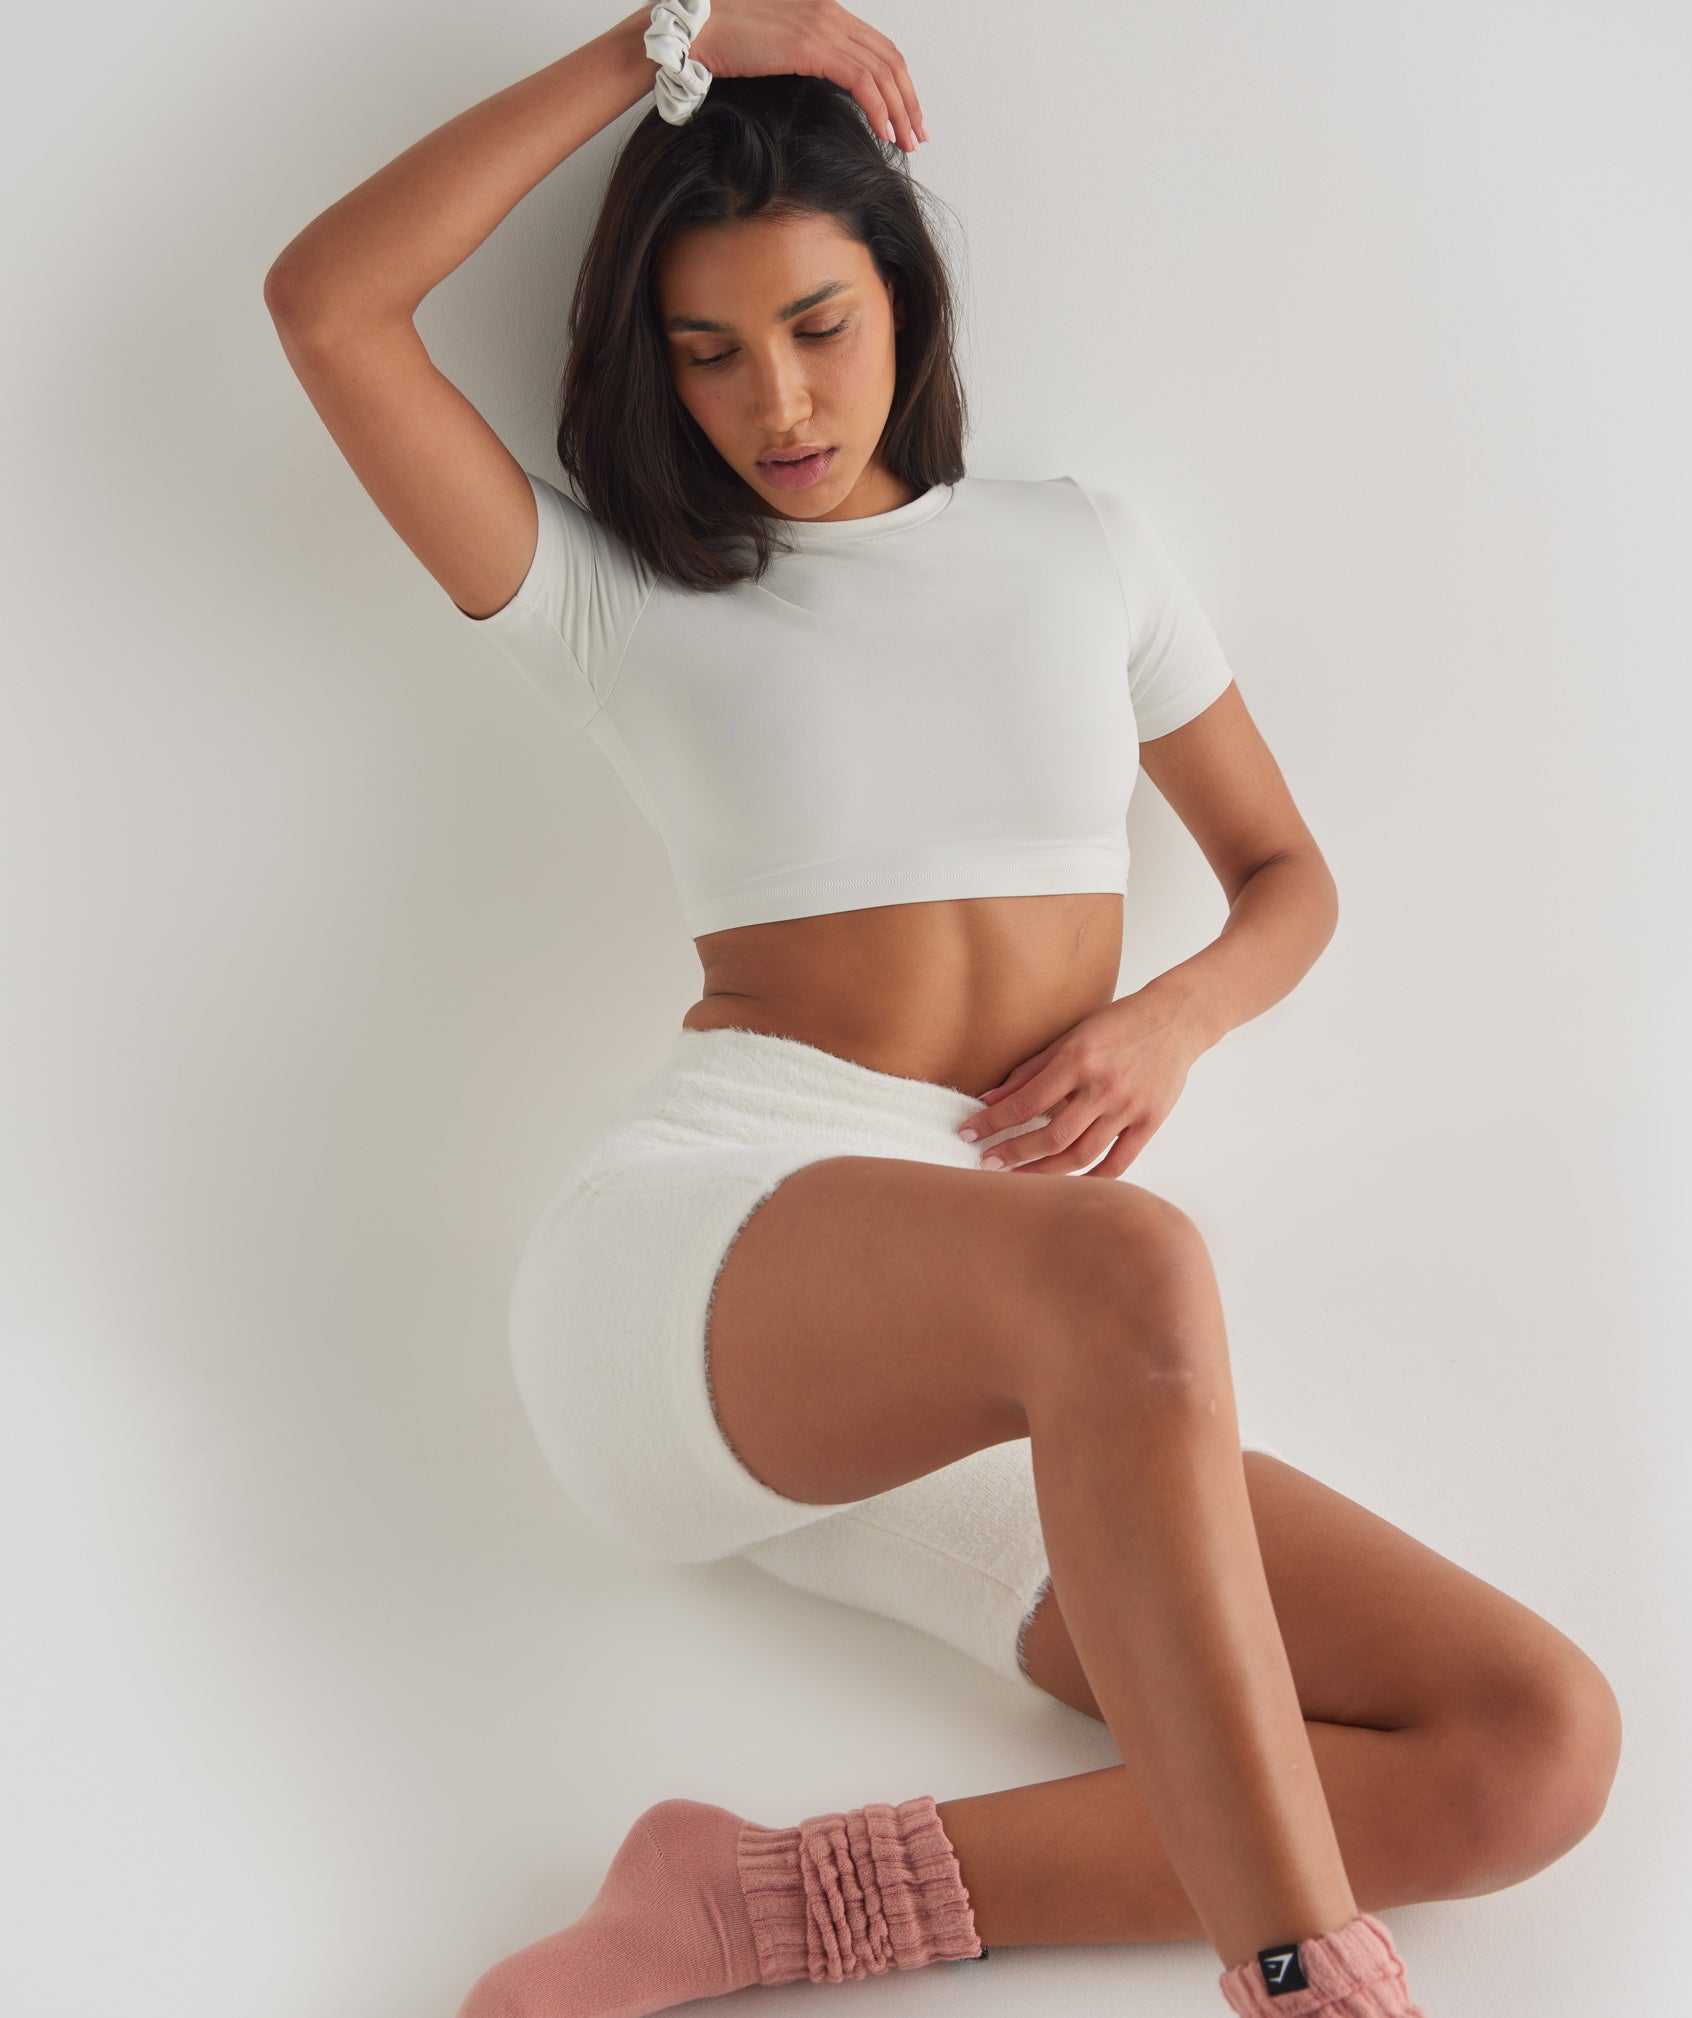 Whitney Short Sleeve Crop Top in Skylight White